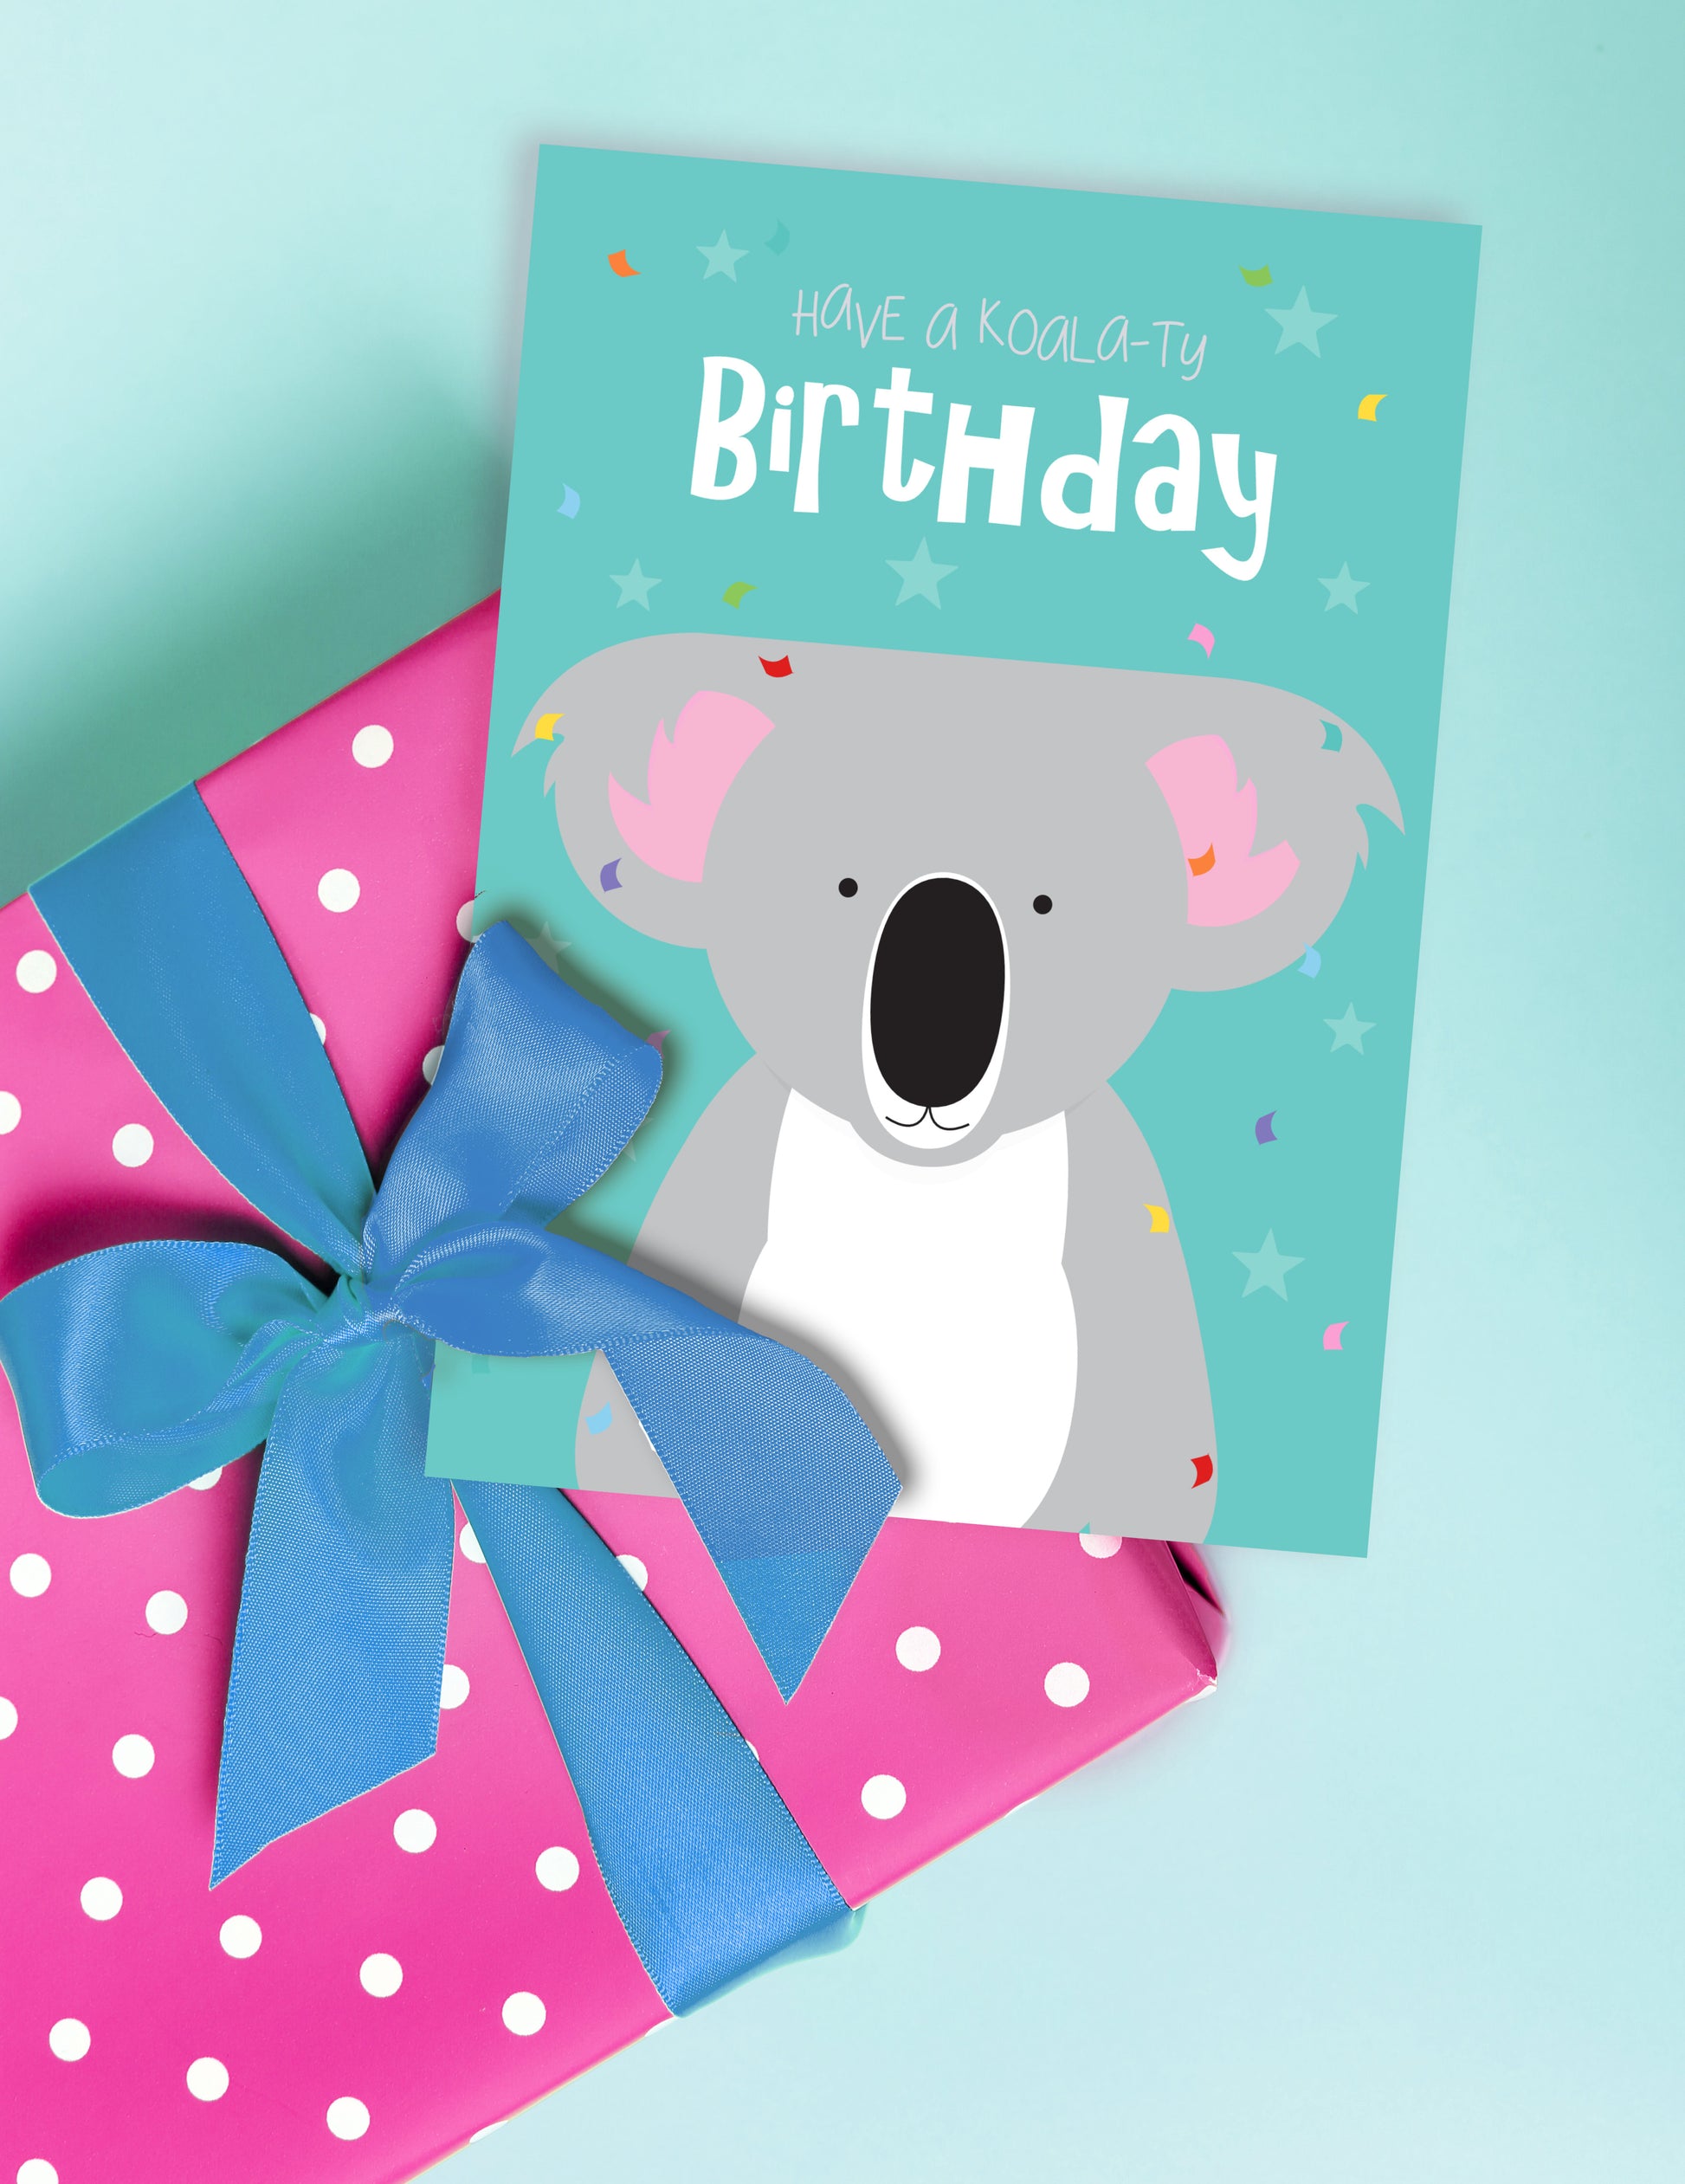 card features an adorable koala design sitting with gift